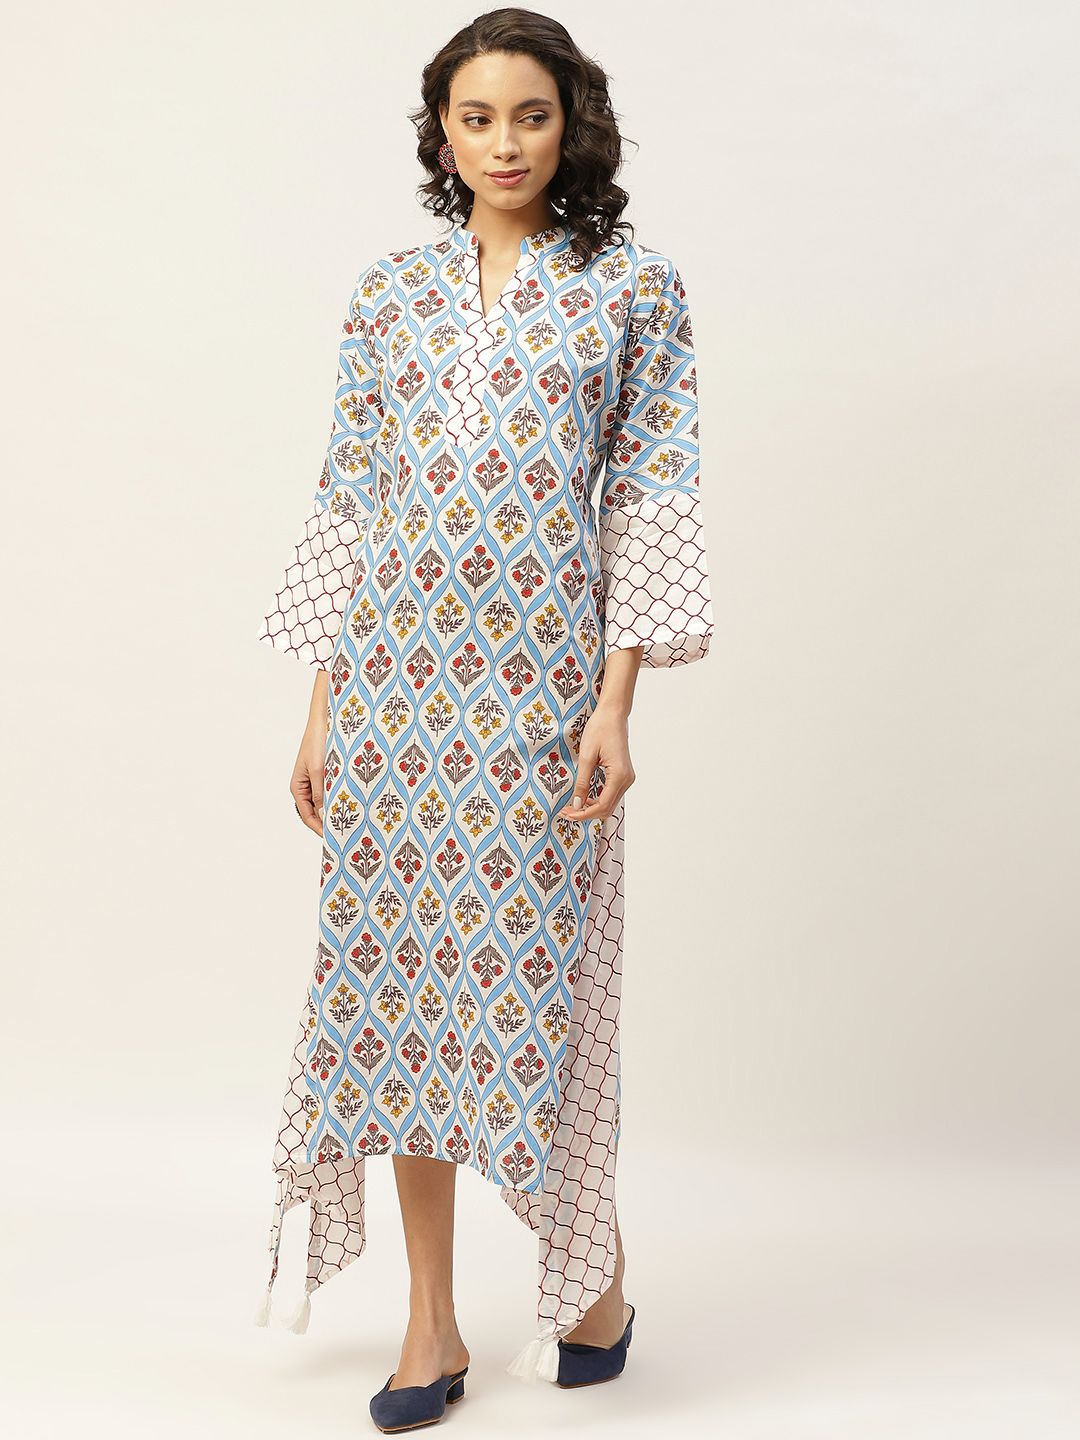 Shae by SASSAFRAS Women Blue & White Floral Printed Pure Cotton A-Line Dress Price in India